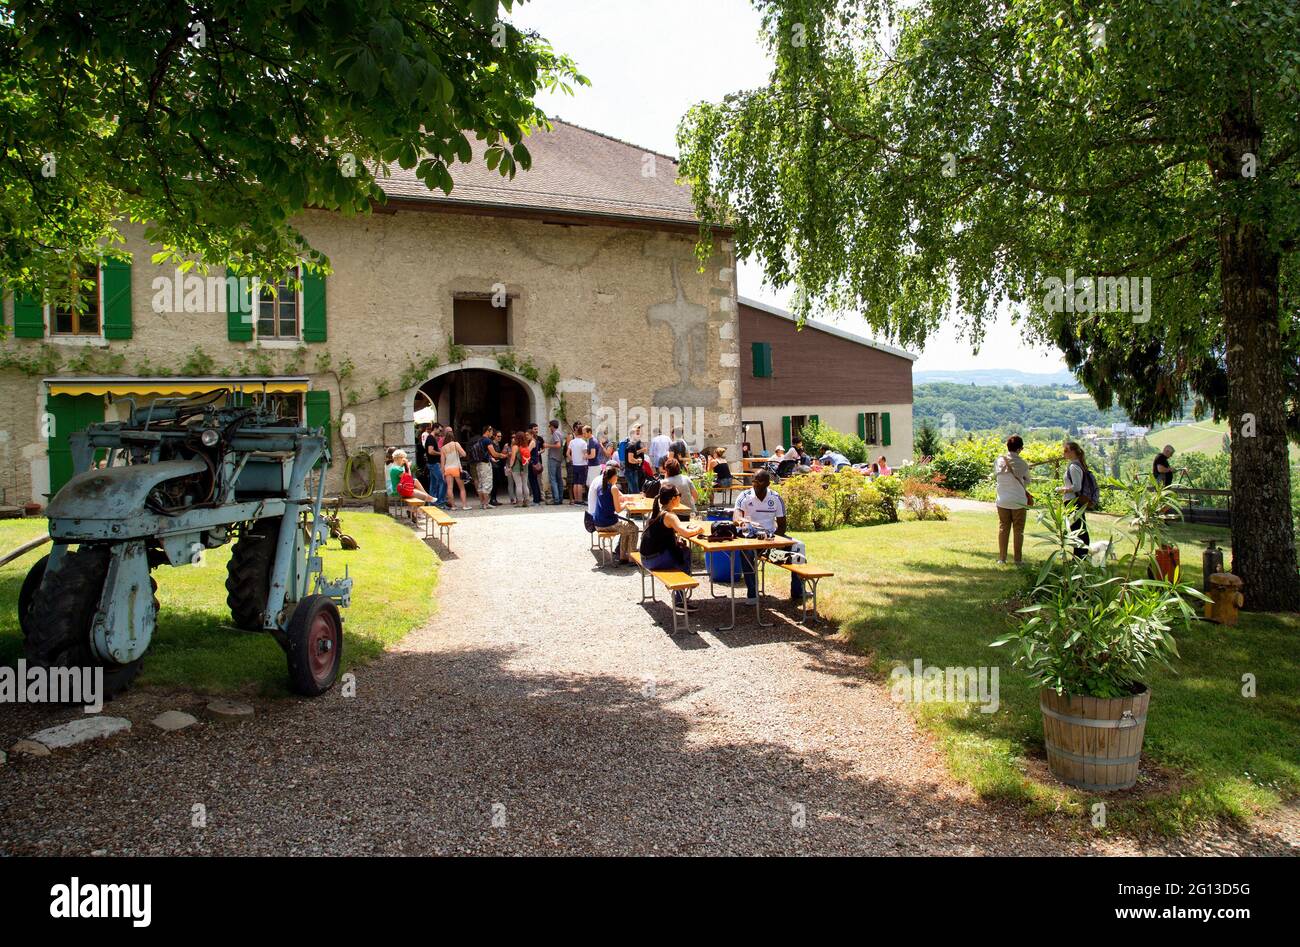 ´Caves ouvertes´ annual event when vineyards and cellars are open for public and tasting wines is possible, people enjoying event and tasting wines, Stock Photo